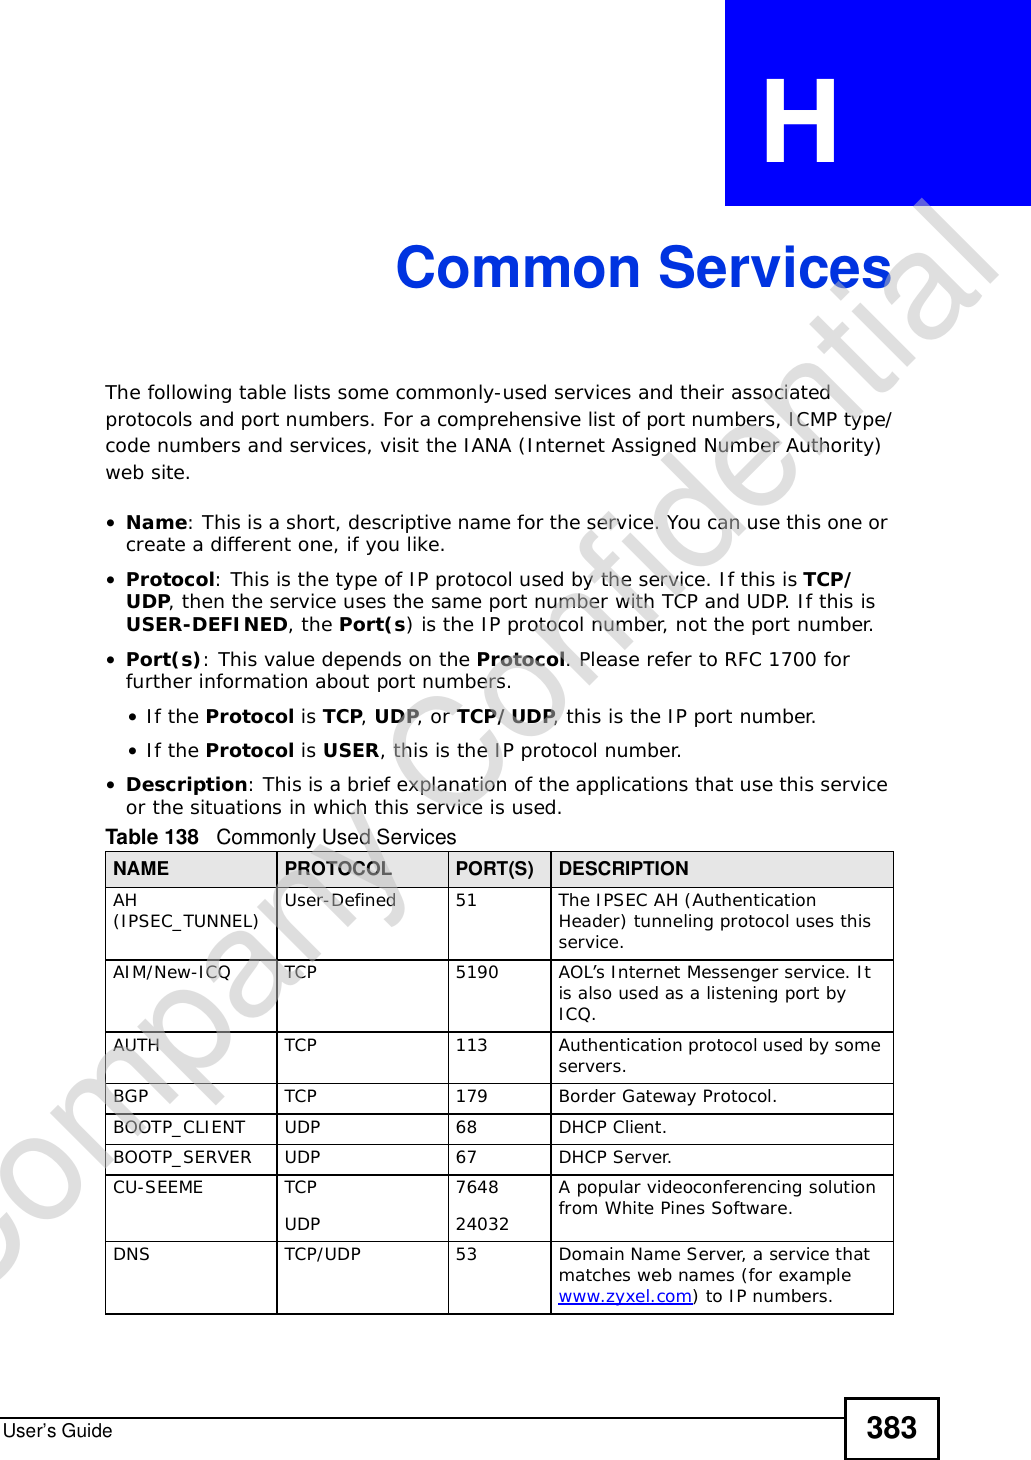 User’s Guide 383APPENDIX  H Common ServicesThe following table lists some commonly-used services and their associated protocols and port numbers. For a comprehensive list of port numbers, ICMP type/code numbers and services, visit the IANA (Internet Assigned Number Authority) web site. •Name: This is a short, descriptive name for the service. You can use this one or create a different one, if you like.•Protocol: This is the type of IP protocol used by the service. If this is TCP/UDP, then the service uses the same port number with TCP and UDP. If this is USER-DEFINED, the Port(s) is the IP protocol number, not the port number.•Port(s): This value depends on the Protocol. Please refer to RFC 1700 for further information about port numbers.•If the Protocol is TCP,UDP, or TCP/UDP, this is the IP port number.•If the Protocol is USER, this is the IP protocol number.•Description: This is a brief explanation of the applications that use this service or the situations in which this service is used.Table 138   Commonly Used ServicesNAME PROTOCOL PORT(S) DESCRIPTIONAH(IPSEC_TUNNEL) User-Defined 51 The IPSEC AH (Authentication Header) tunneling protocol uses this service.AIM/New-ICQ TCP 5190 AOL’s Internet Messenger service. It is also used as a listening port by ICQ.AUTH TCP 113 Authentication protocol used by some servers.BGP TCP 179 Border Gateway Protocol.BOOTP_CLIENT UDP 68 DHCP Client.BOOTP_SERVER UDP 67 DHCP Server.CU-SEEME TCPUDP764824032A popular videoconferencing solution from White Pines Software.DNS TCP/UDP 53 Domain Name Server, a service that matches web names (for example www.zyxel.com) to IP numbers.Company Confidential